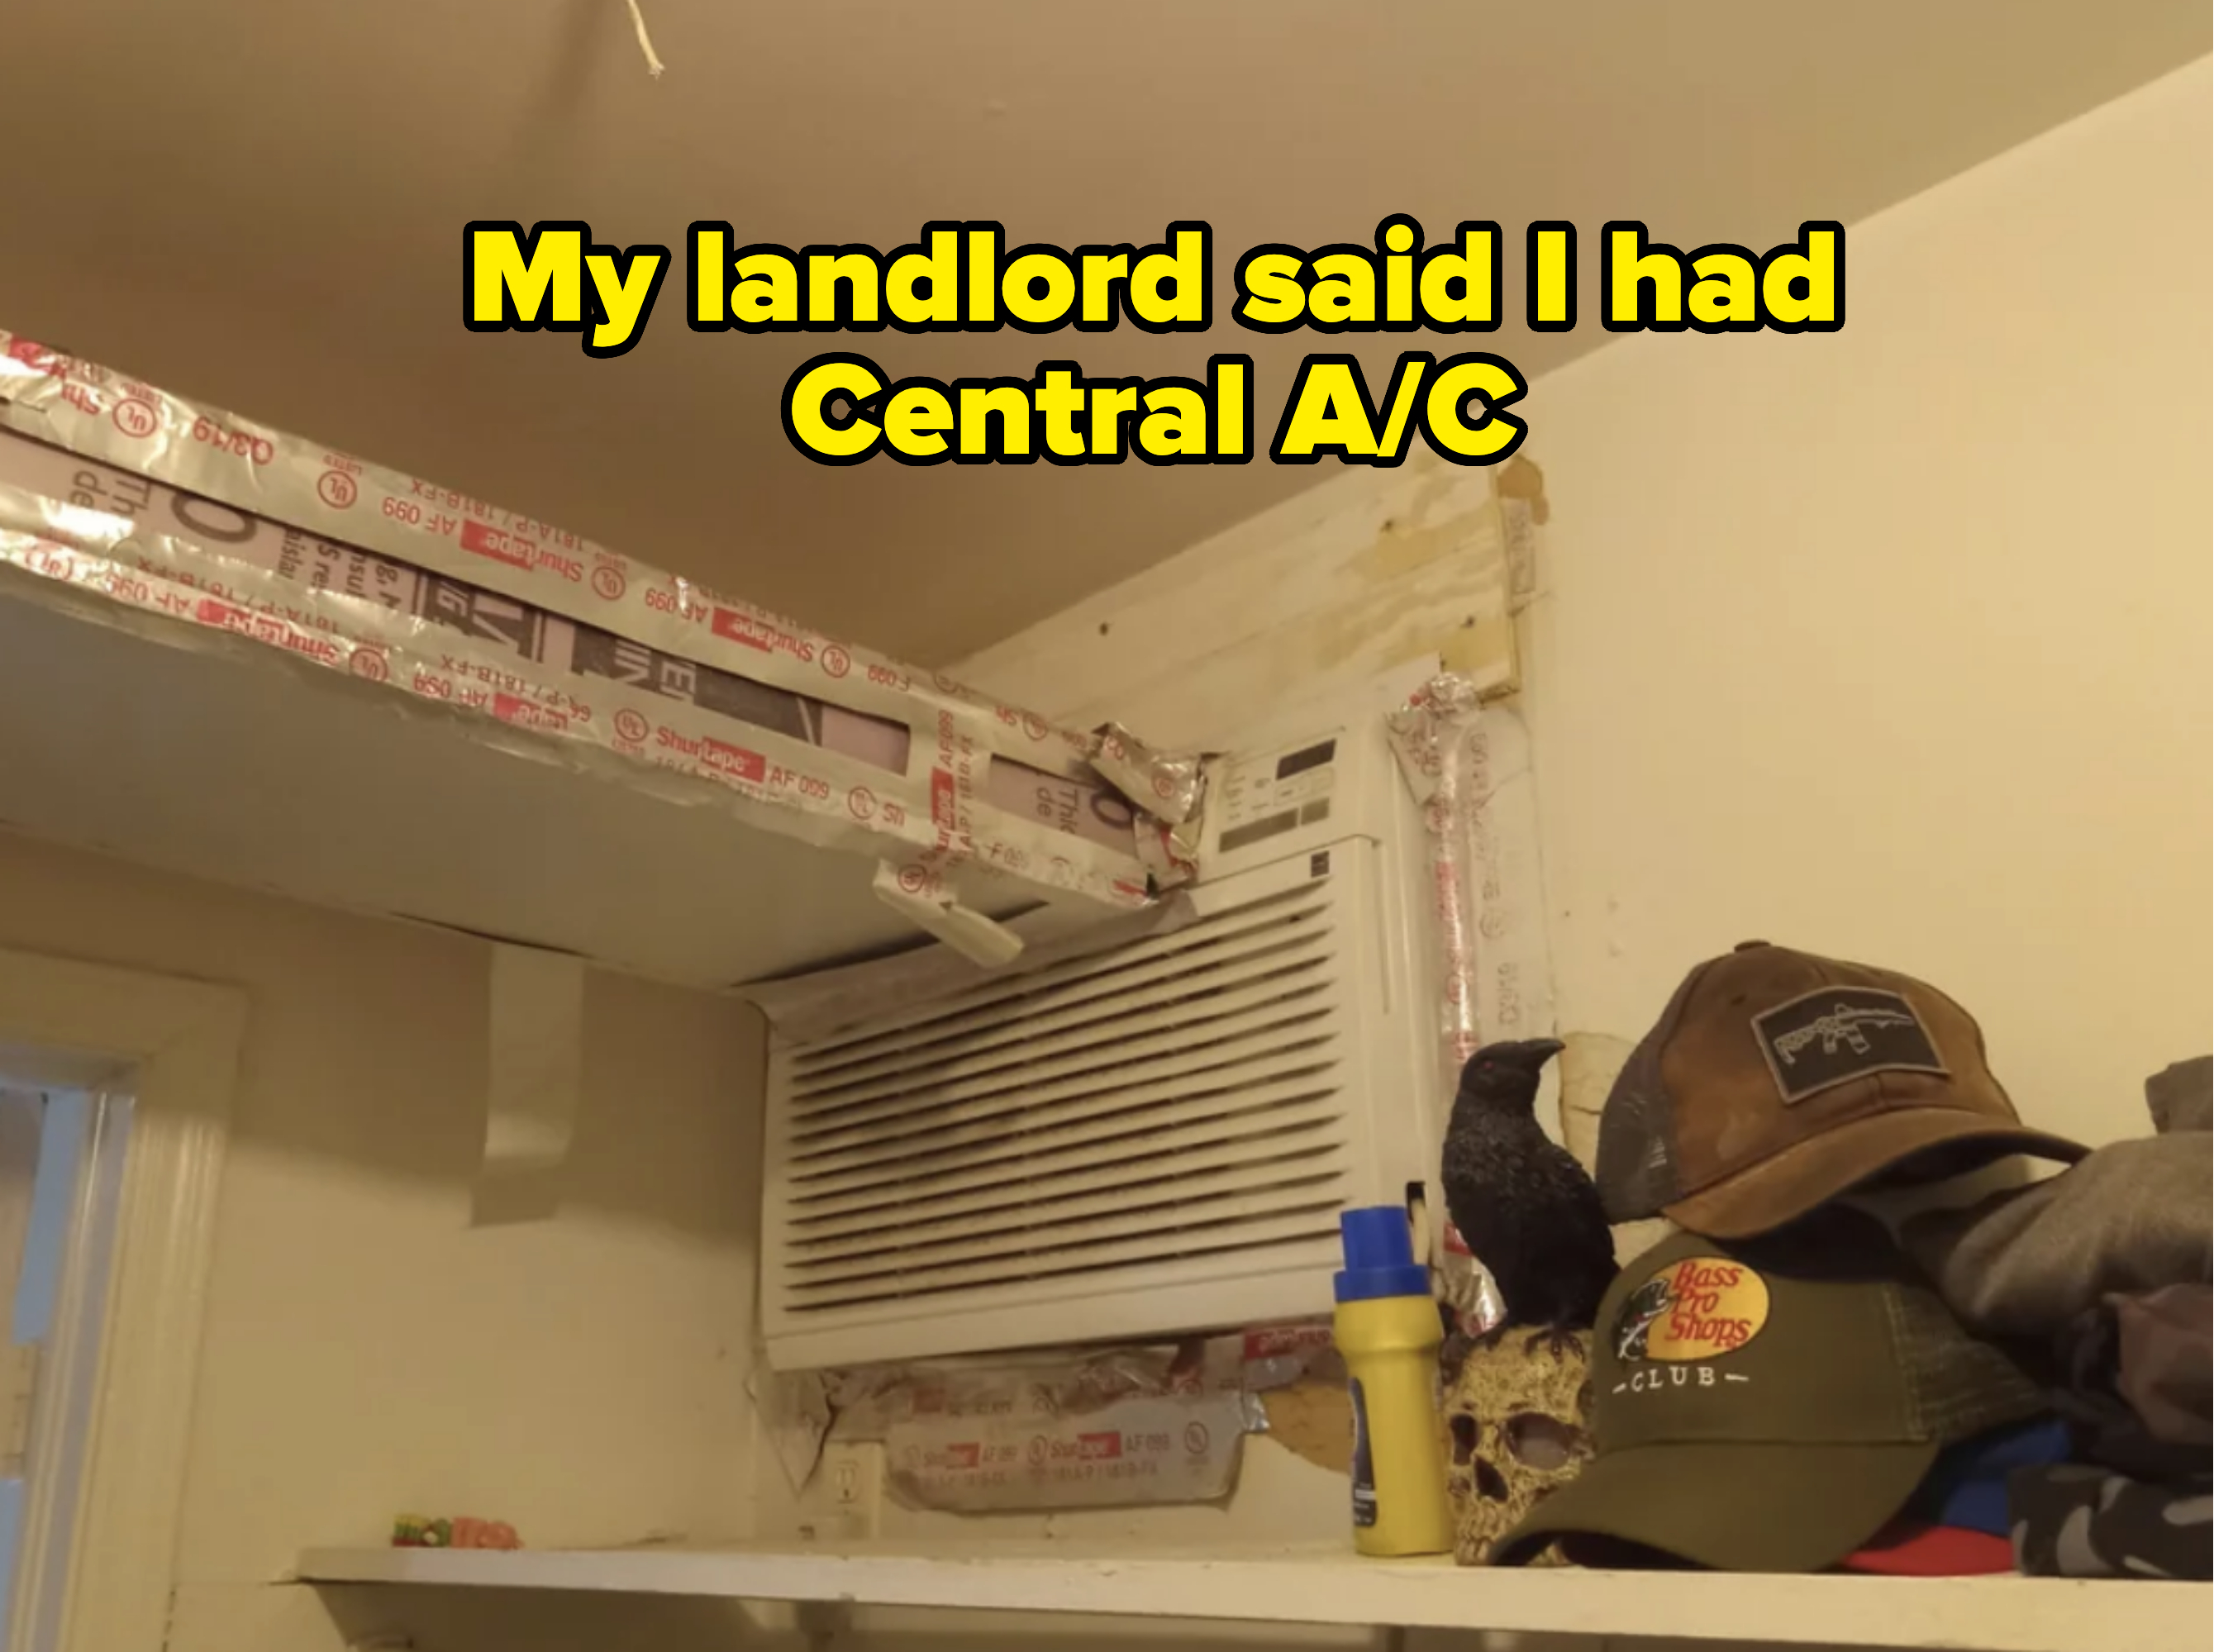 Air conditioner with tape around it, pigeon perched beside a shelf with various items